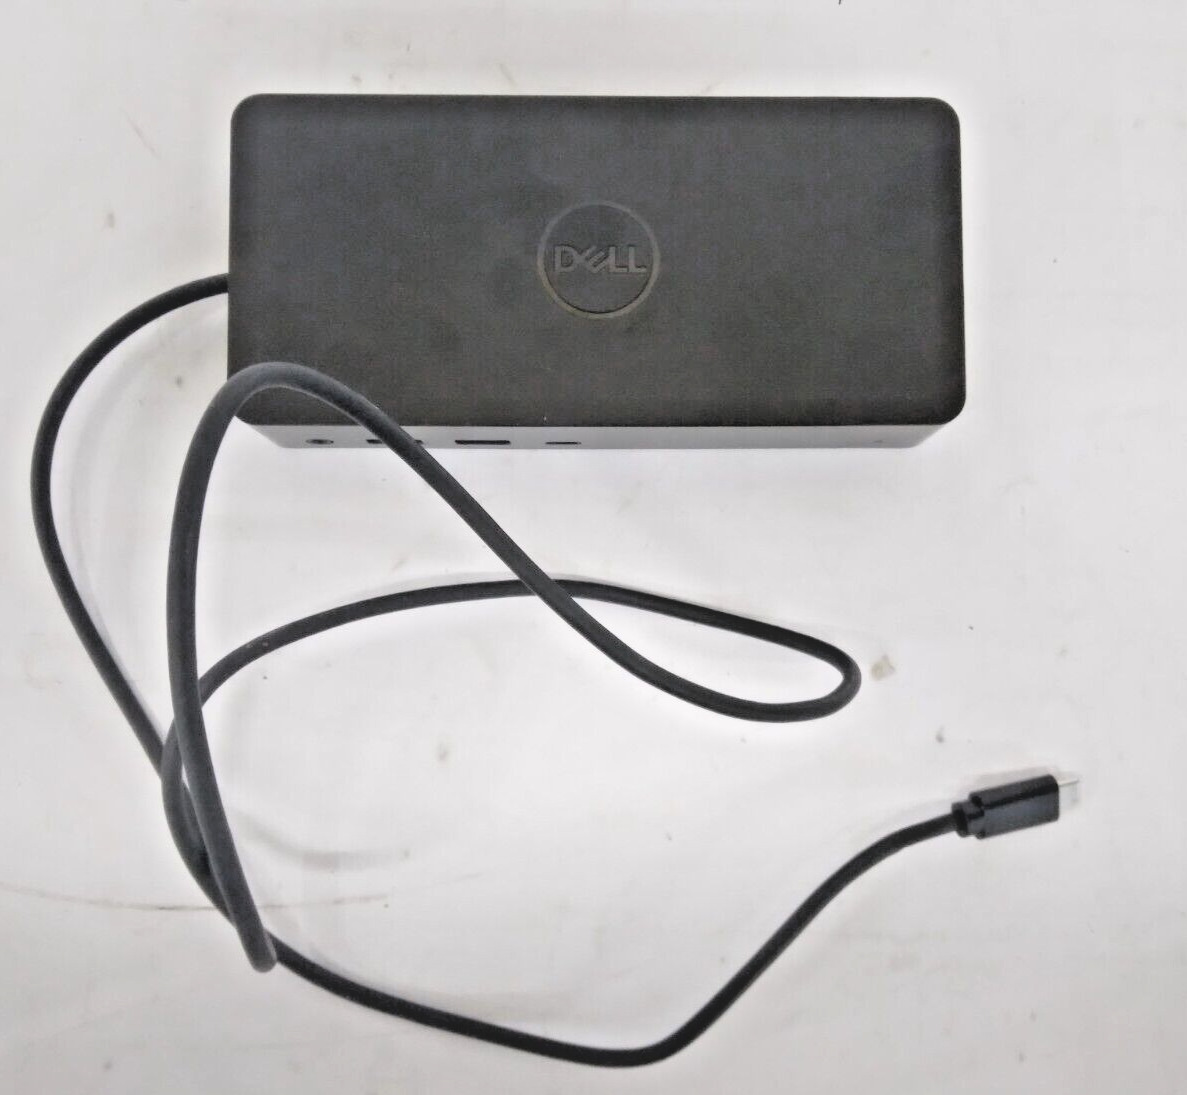 Dell Universal Dock D6000 USB Laptop Docking Station without AC Adapter